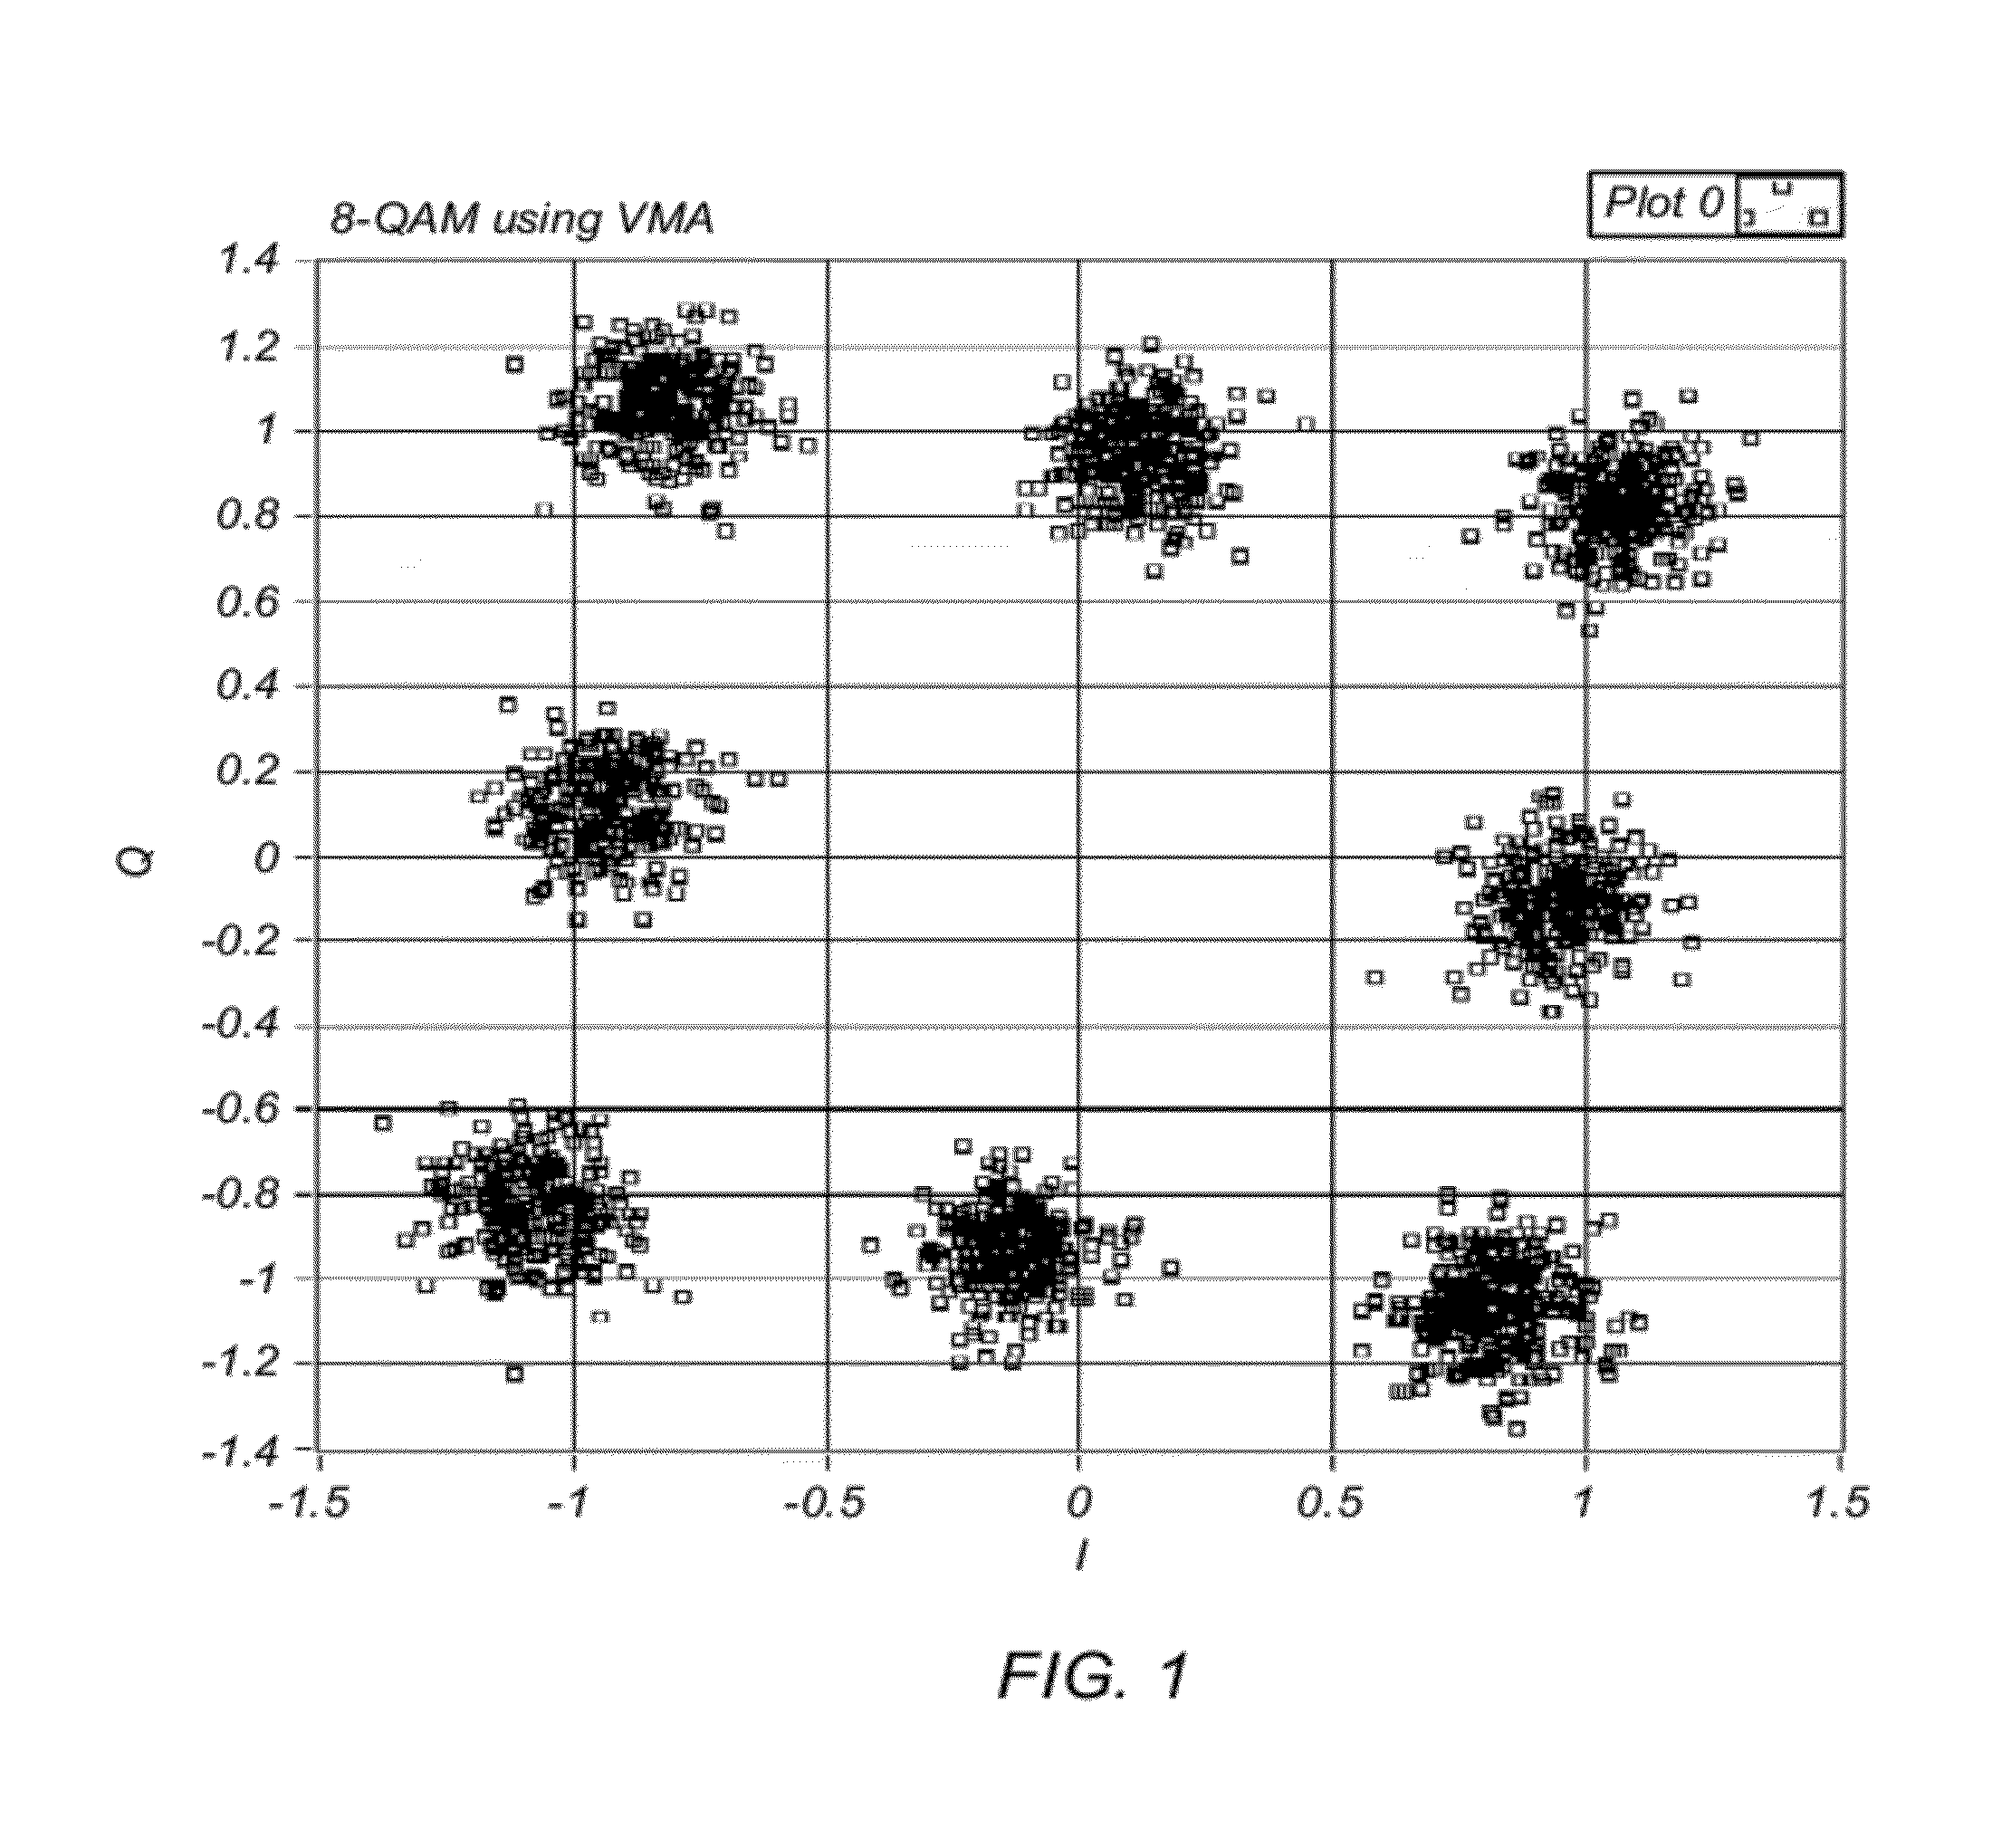 Variable modulus mechanism for performing equalization without a priori knowledge of modulation type or constellation order